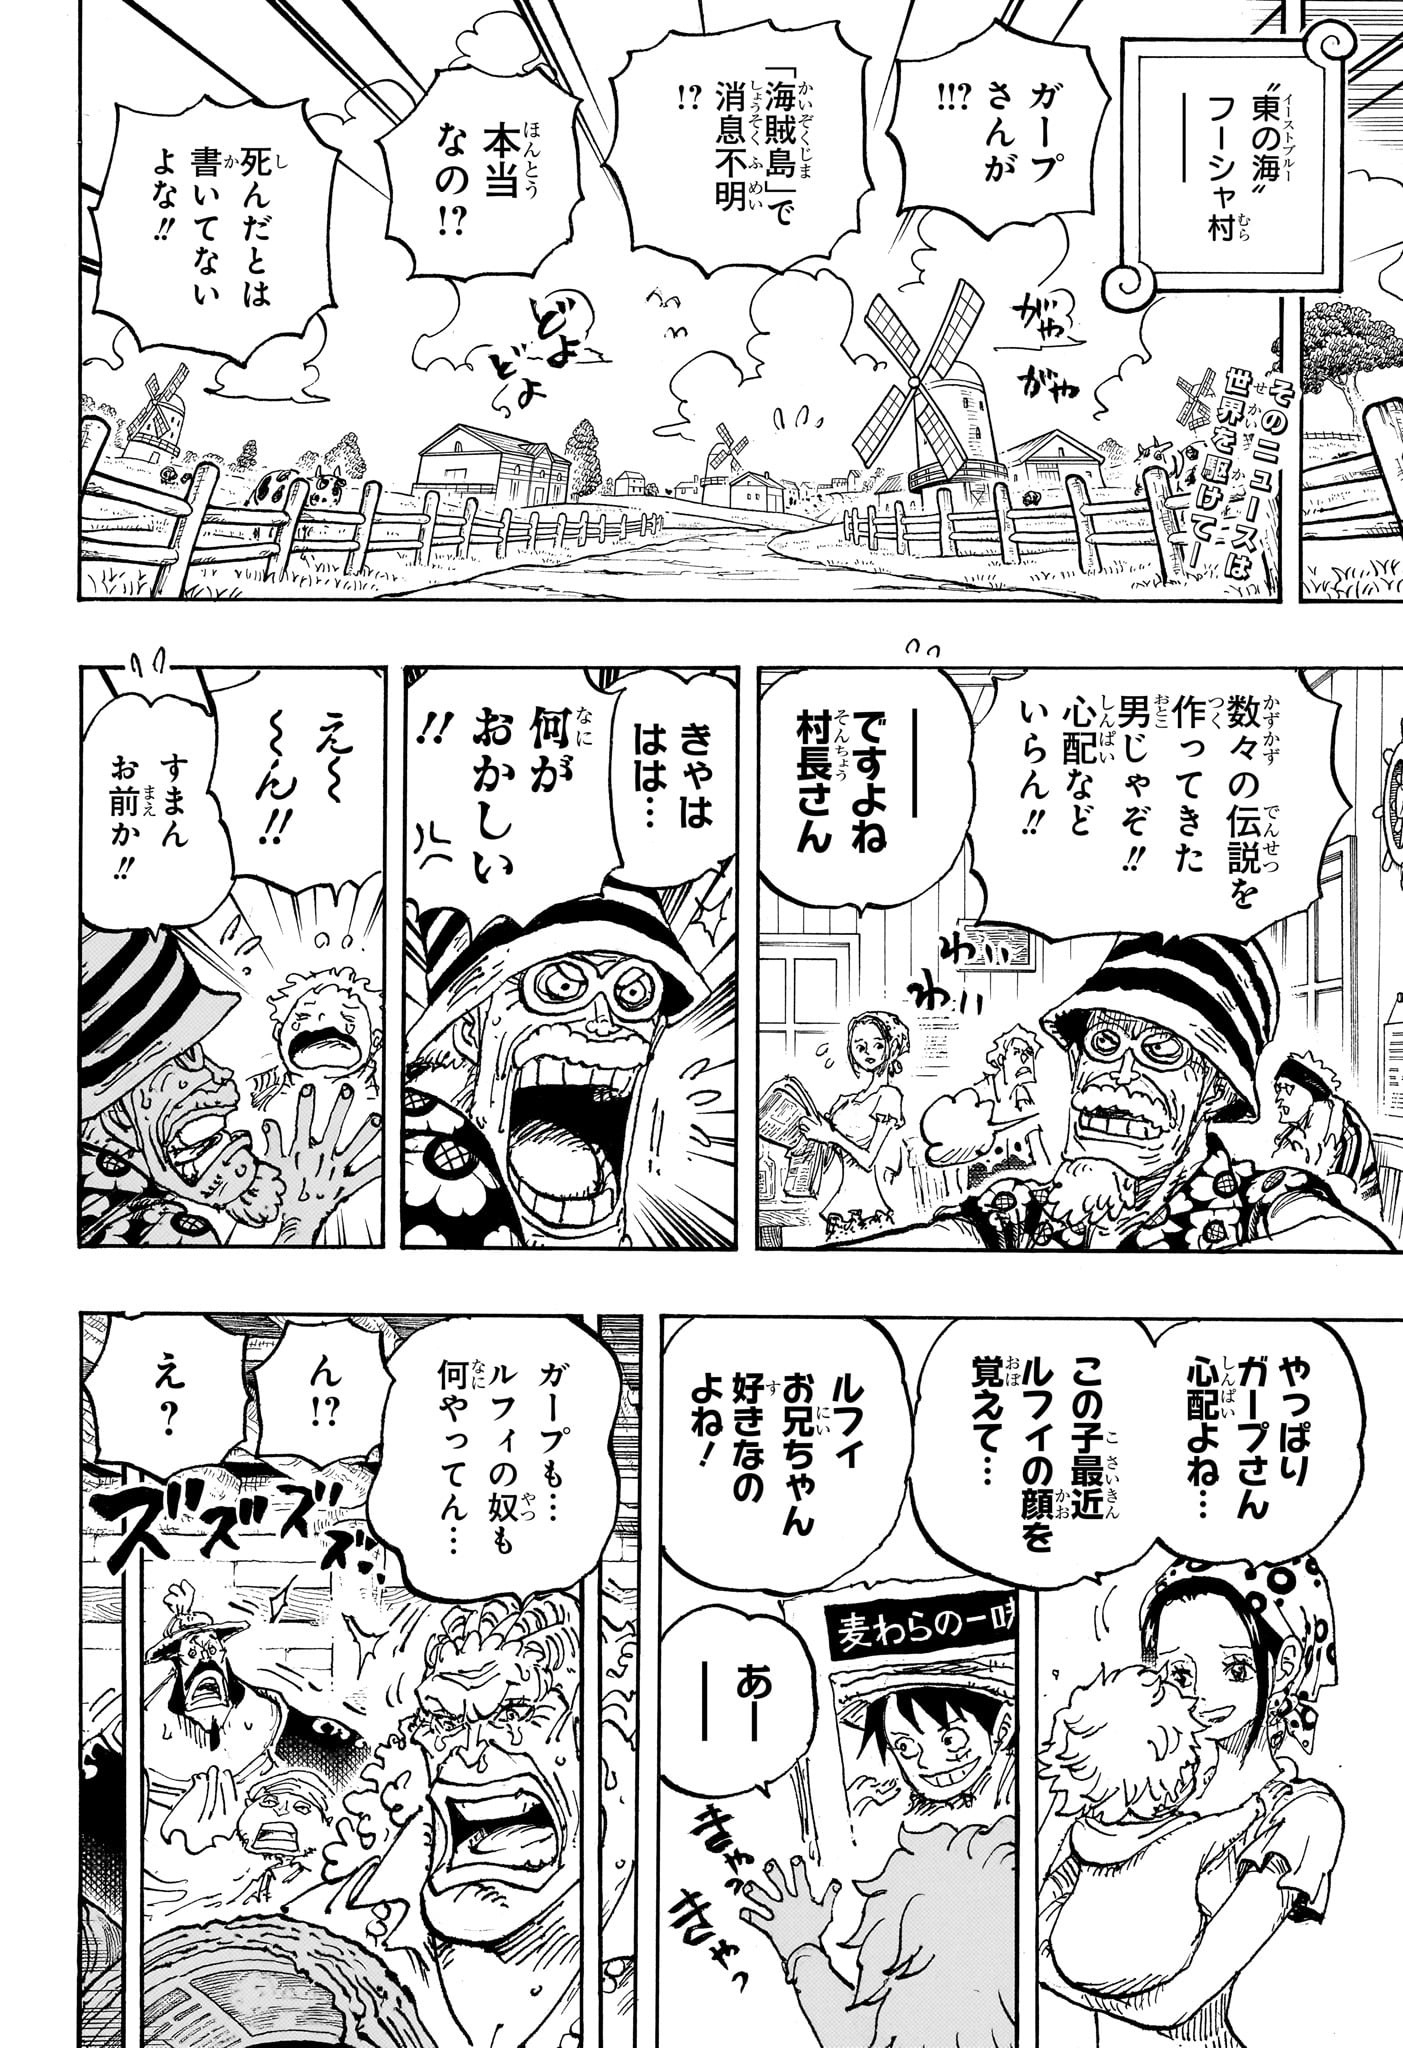 One Piece - Chapter 1089 - Page 2